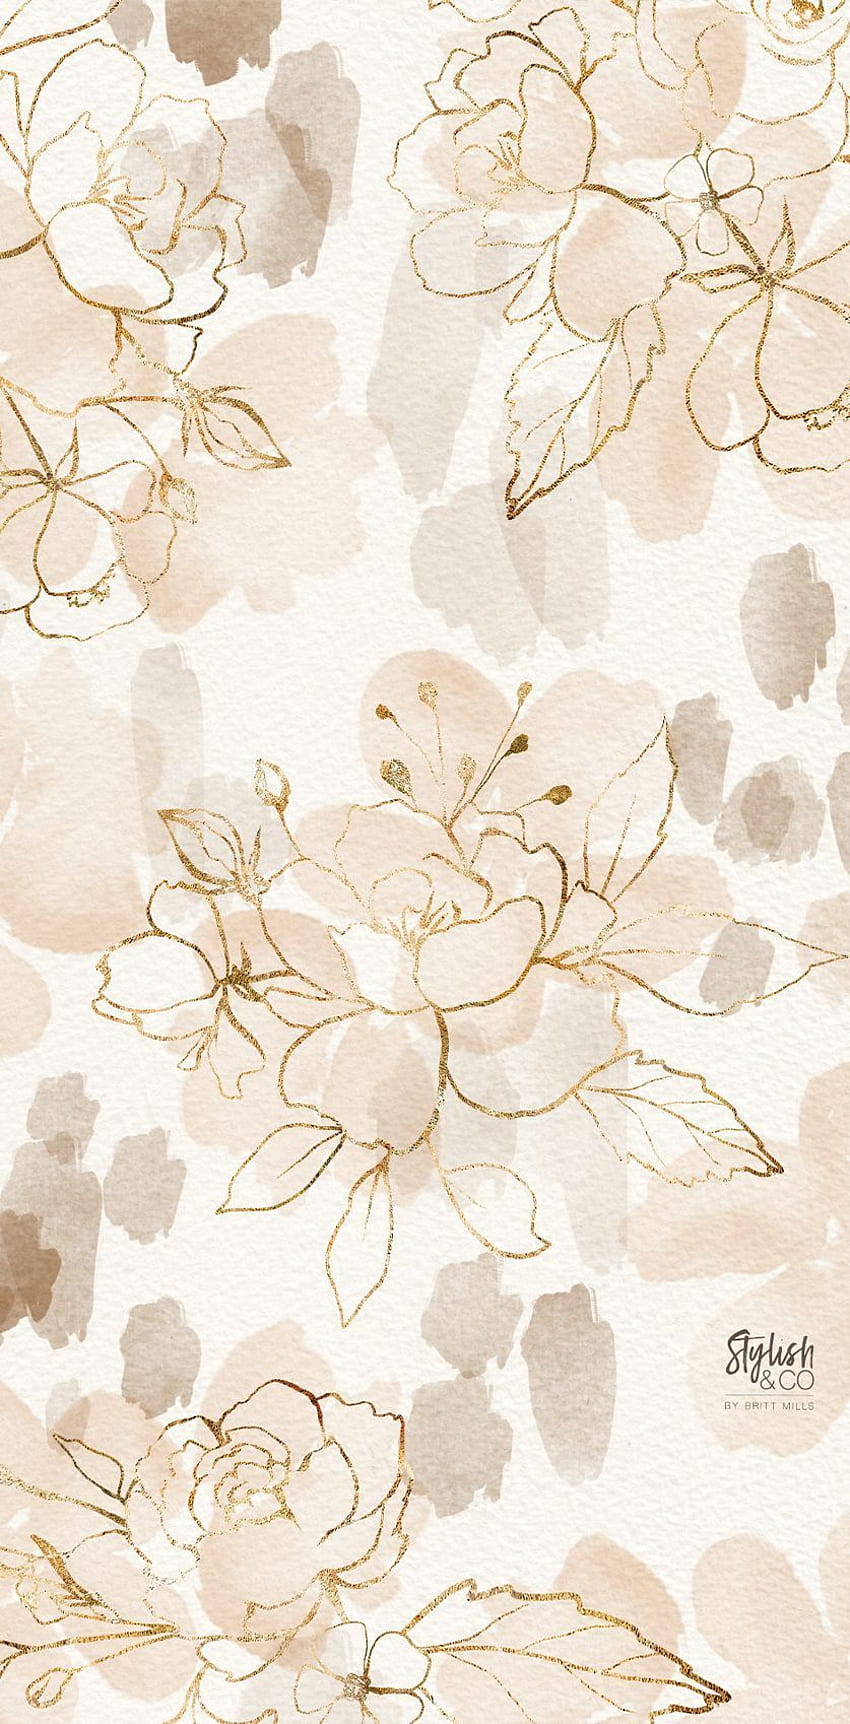 Amazoncom Beautysaid Peel and Stick Wallpaper Floral Boho Wallpaper for  Bedroom 175x118 Inch Vintage Removable Wallpaper Pink Watercolor Peonies   Tools  Home Improvement